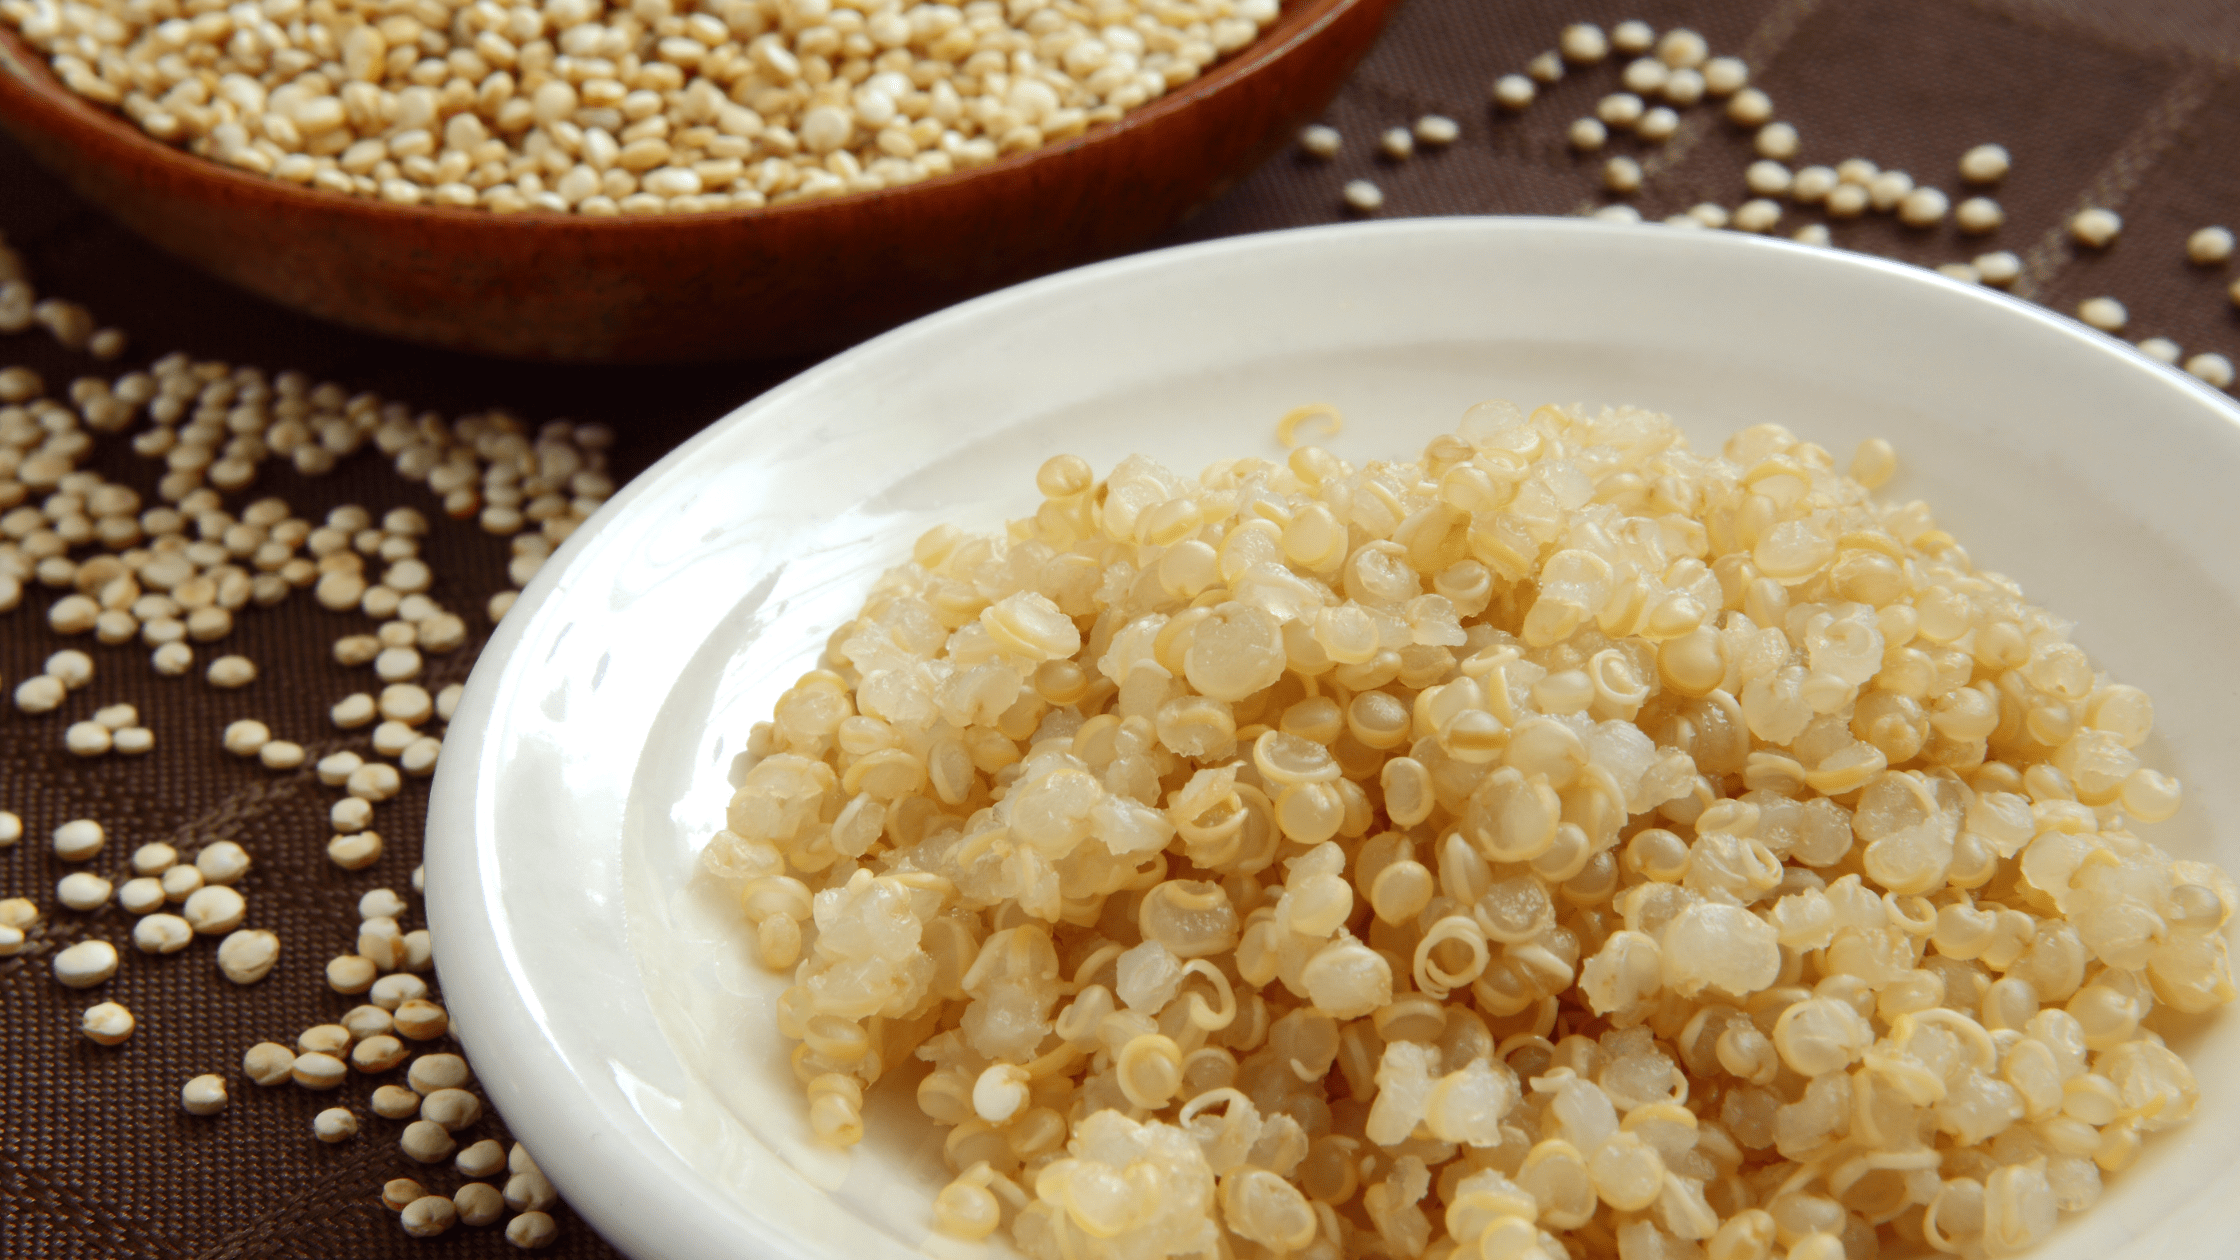 What Rice Cooker Setting to Use for Quinoa: The Best Way to Make Quinoa￼